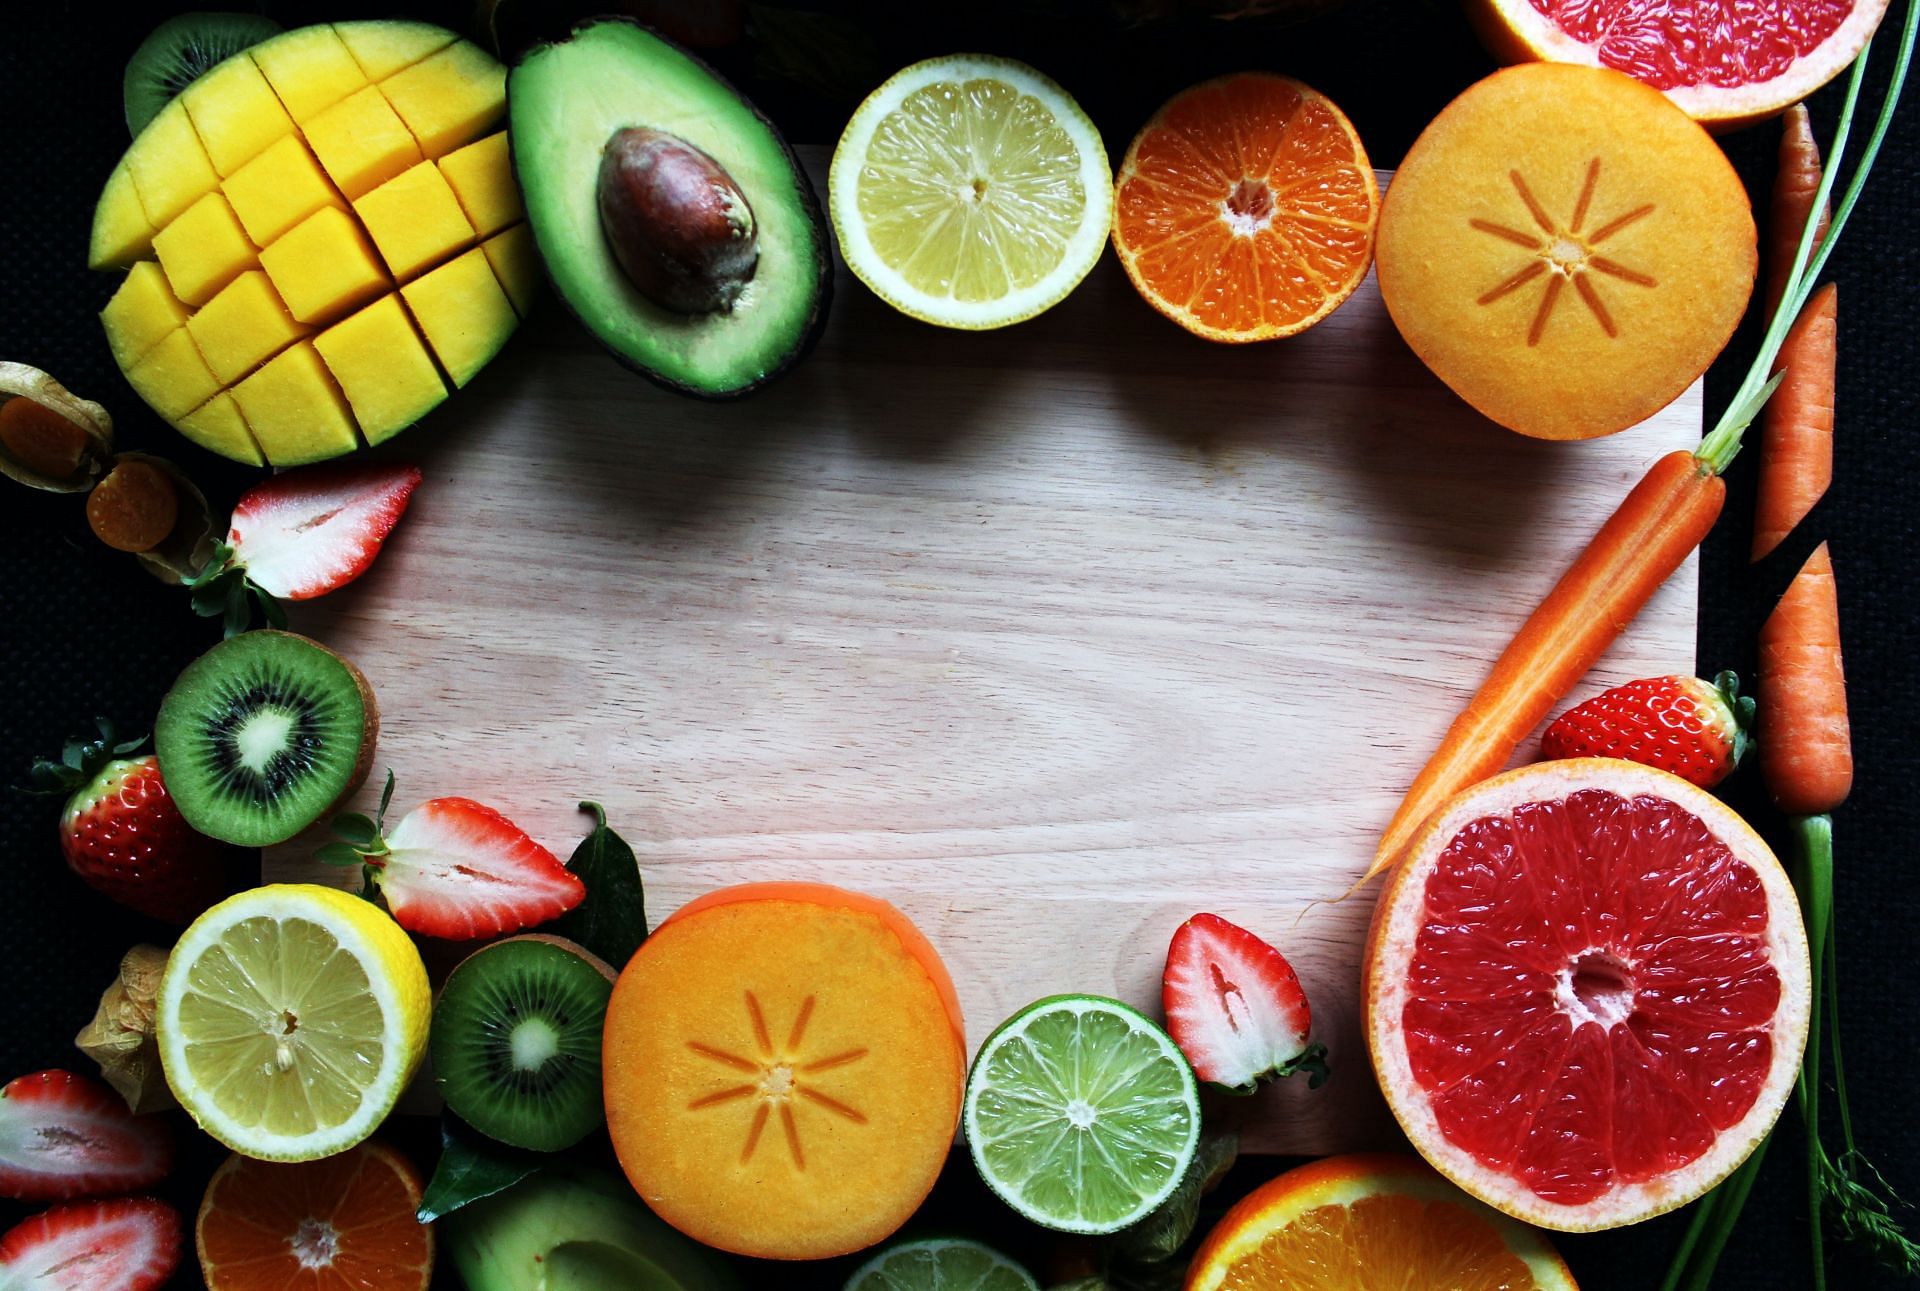 Fresh fruits and vegetables are ideal for a liver detox. (Image via Unsplash/Amoon Ra)